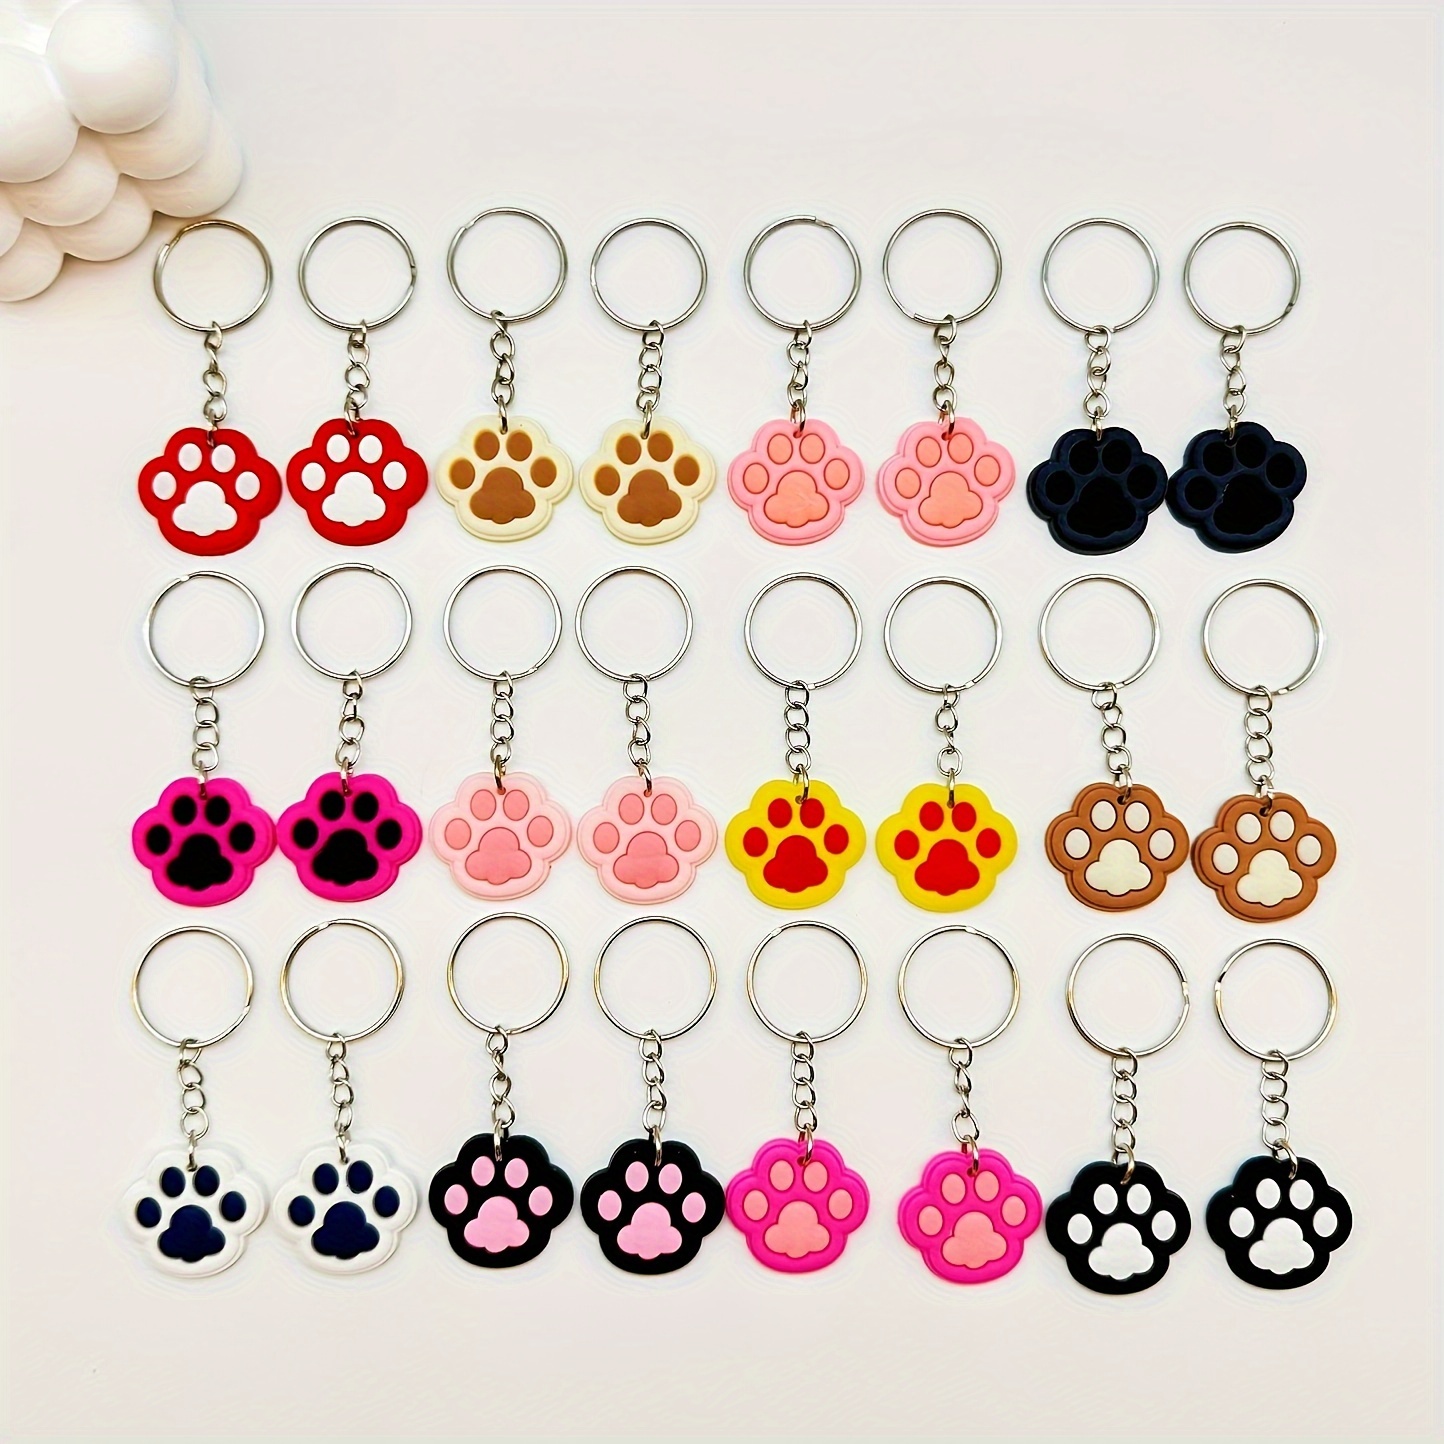 

Pvc Cartoon Animal Paw Print Keychains - Set Of 24 Cute Dog & Cat Key Rings For Car Keys Decoration, Assorted Colors, Birthday Gift Key Chain Collection With Multiple Anime & Cartoon Designs